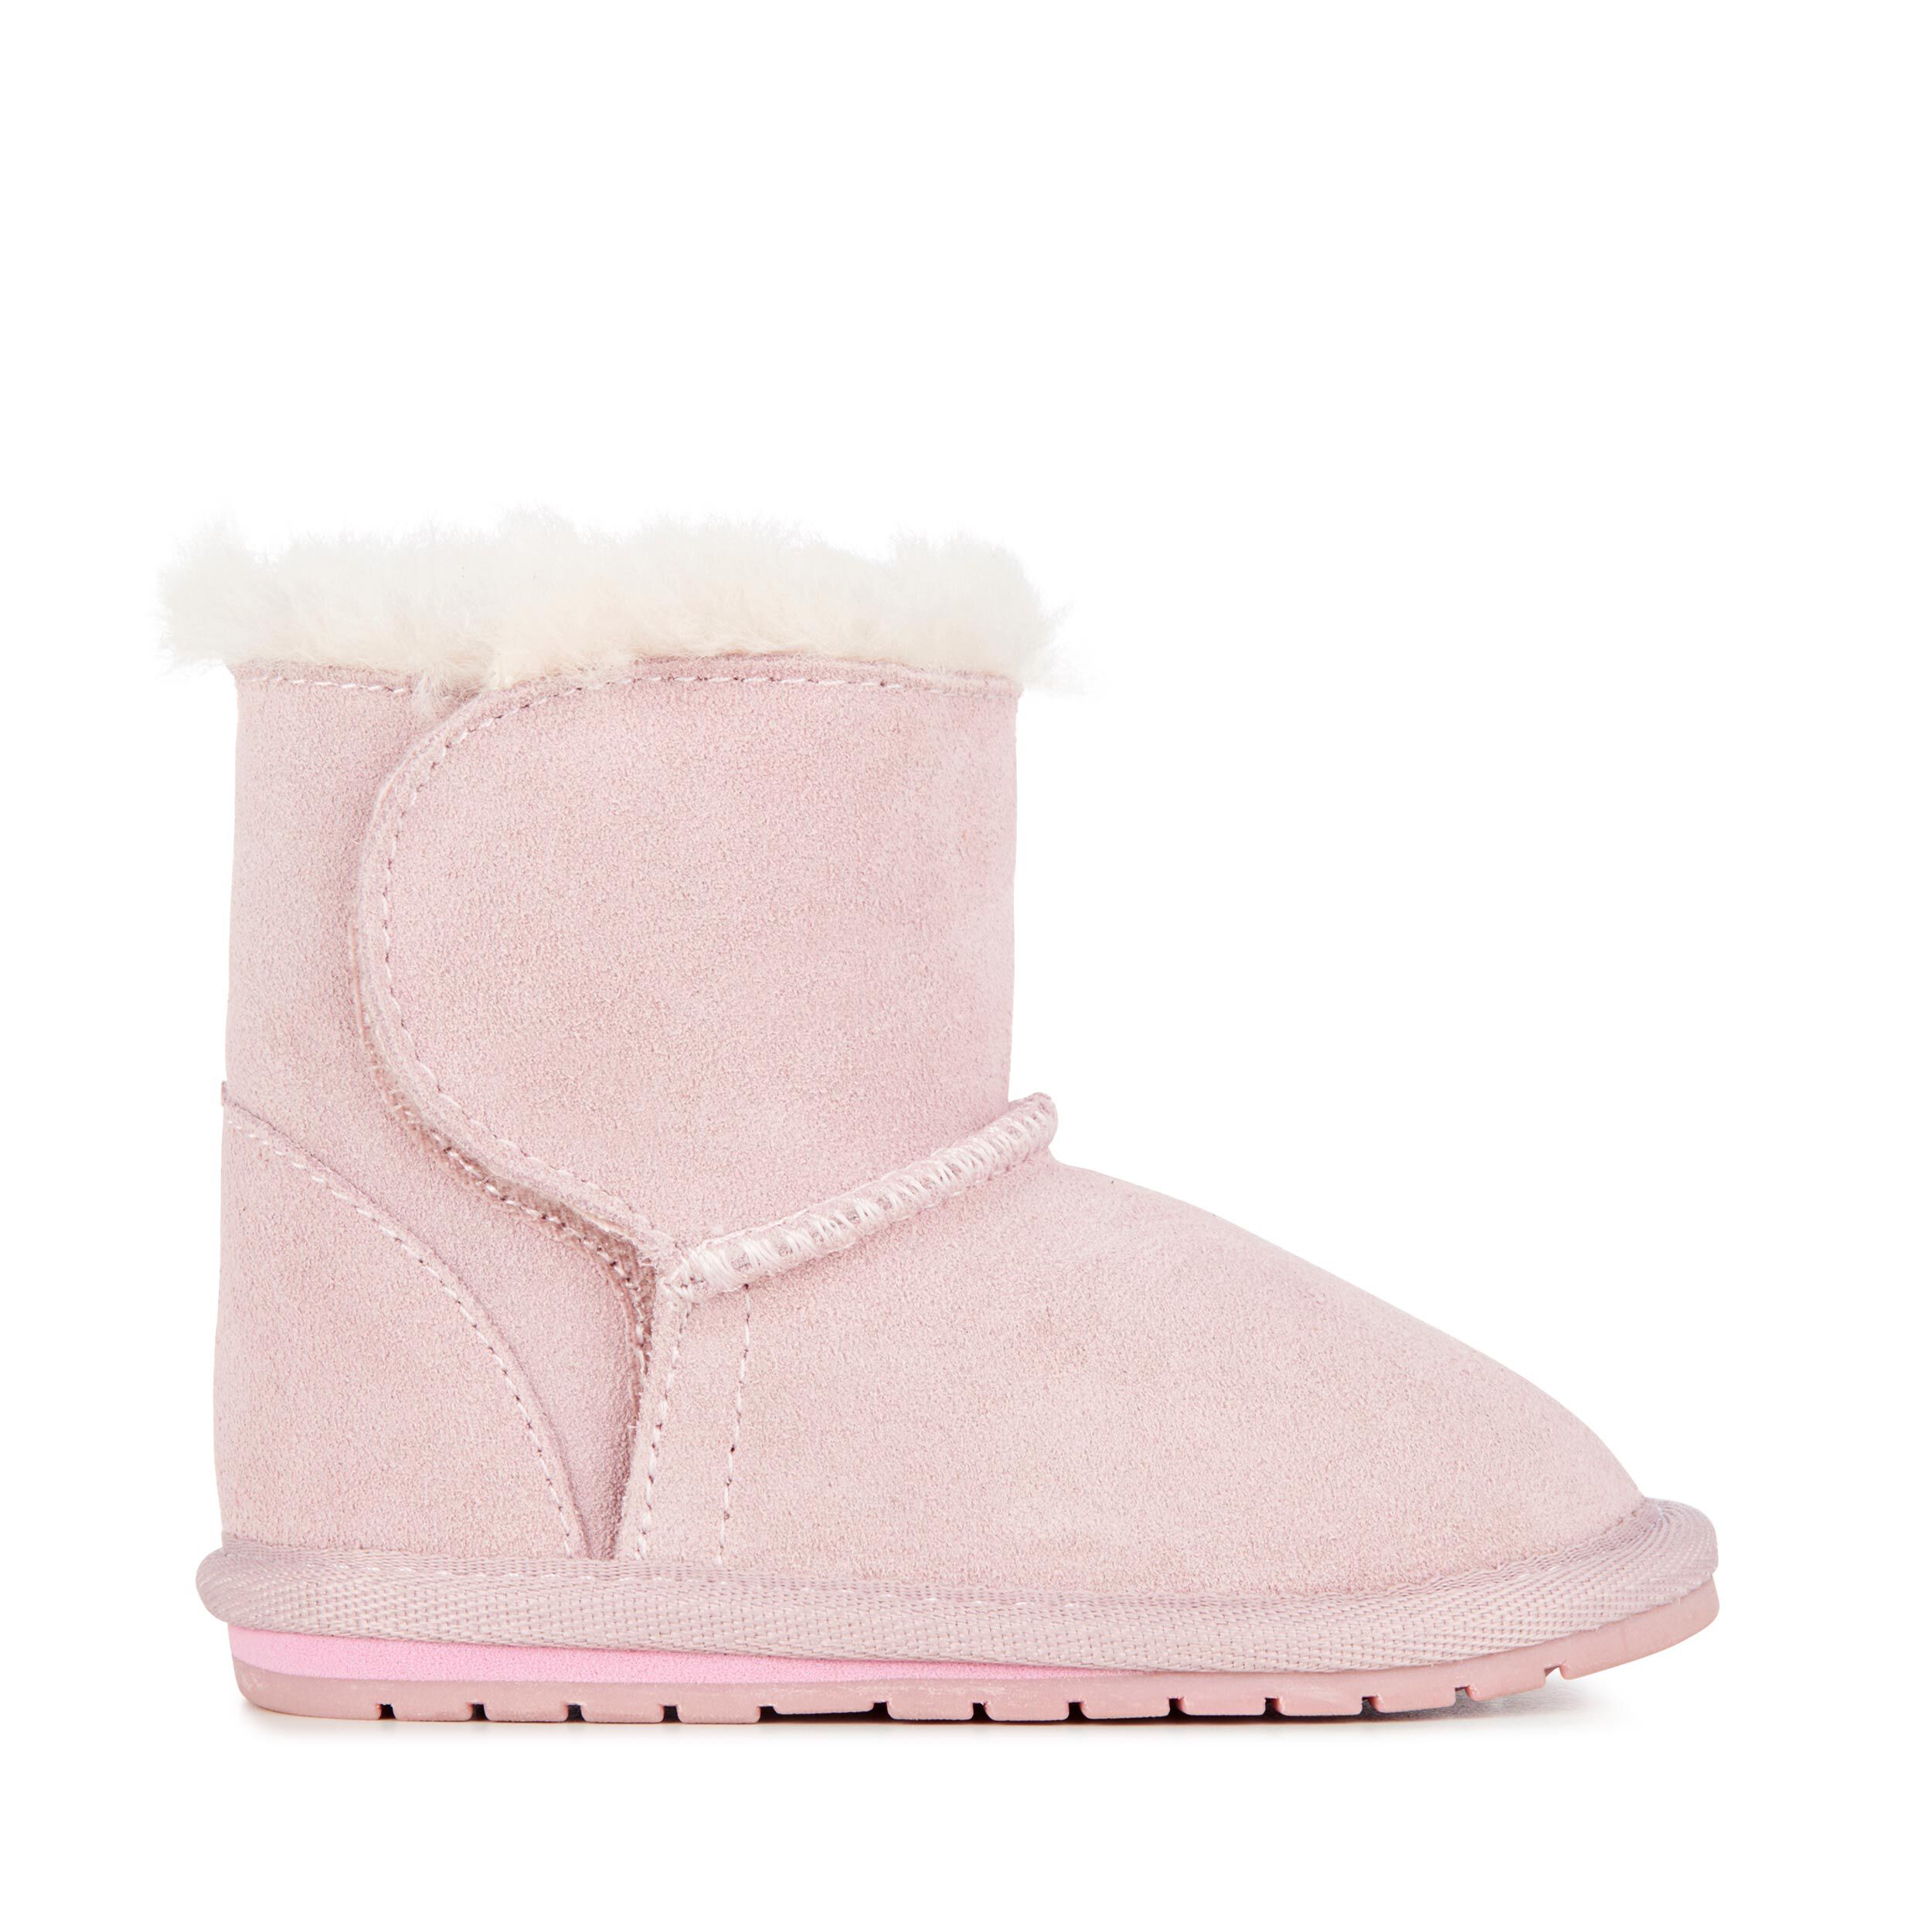 Merino Wool Natural Warm Wool Sheepskin Leather pink Slippers Boots ALL SIZES